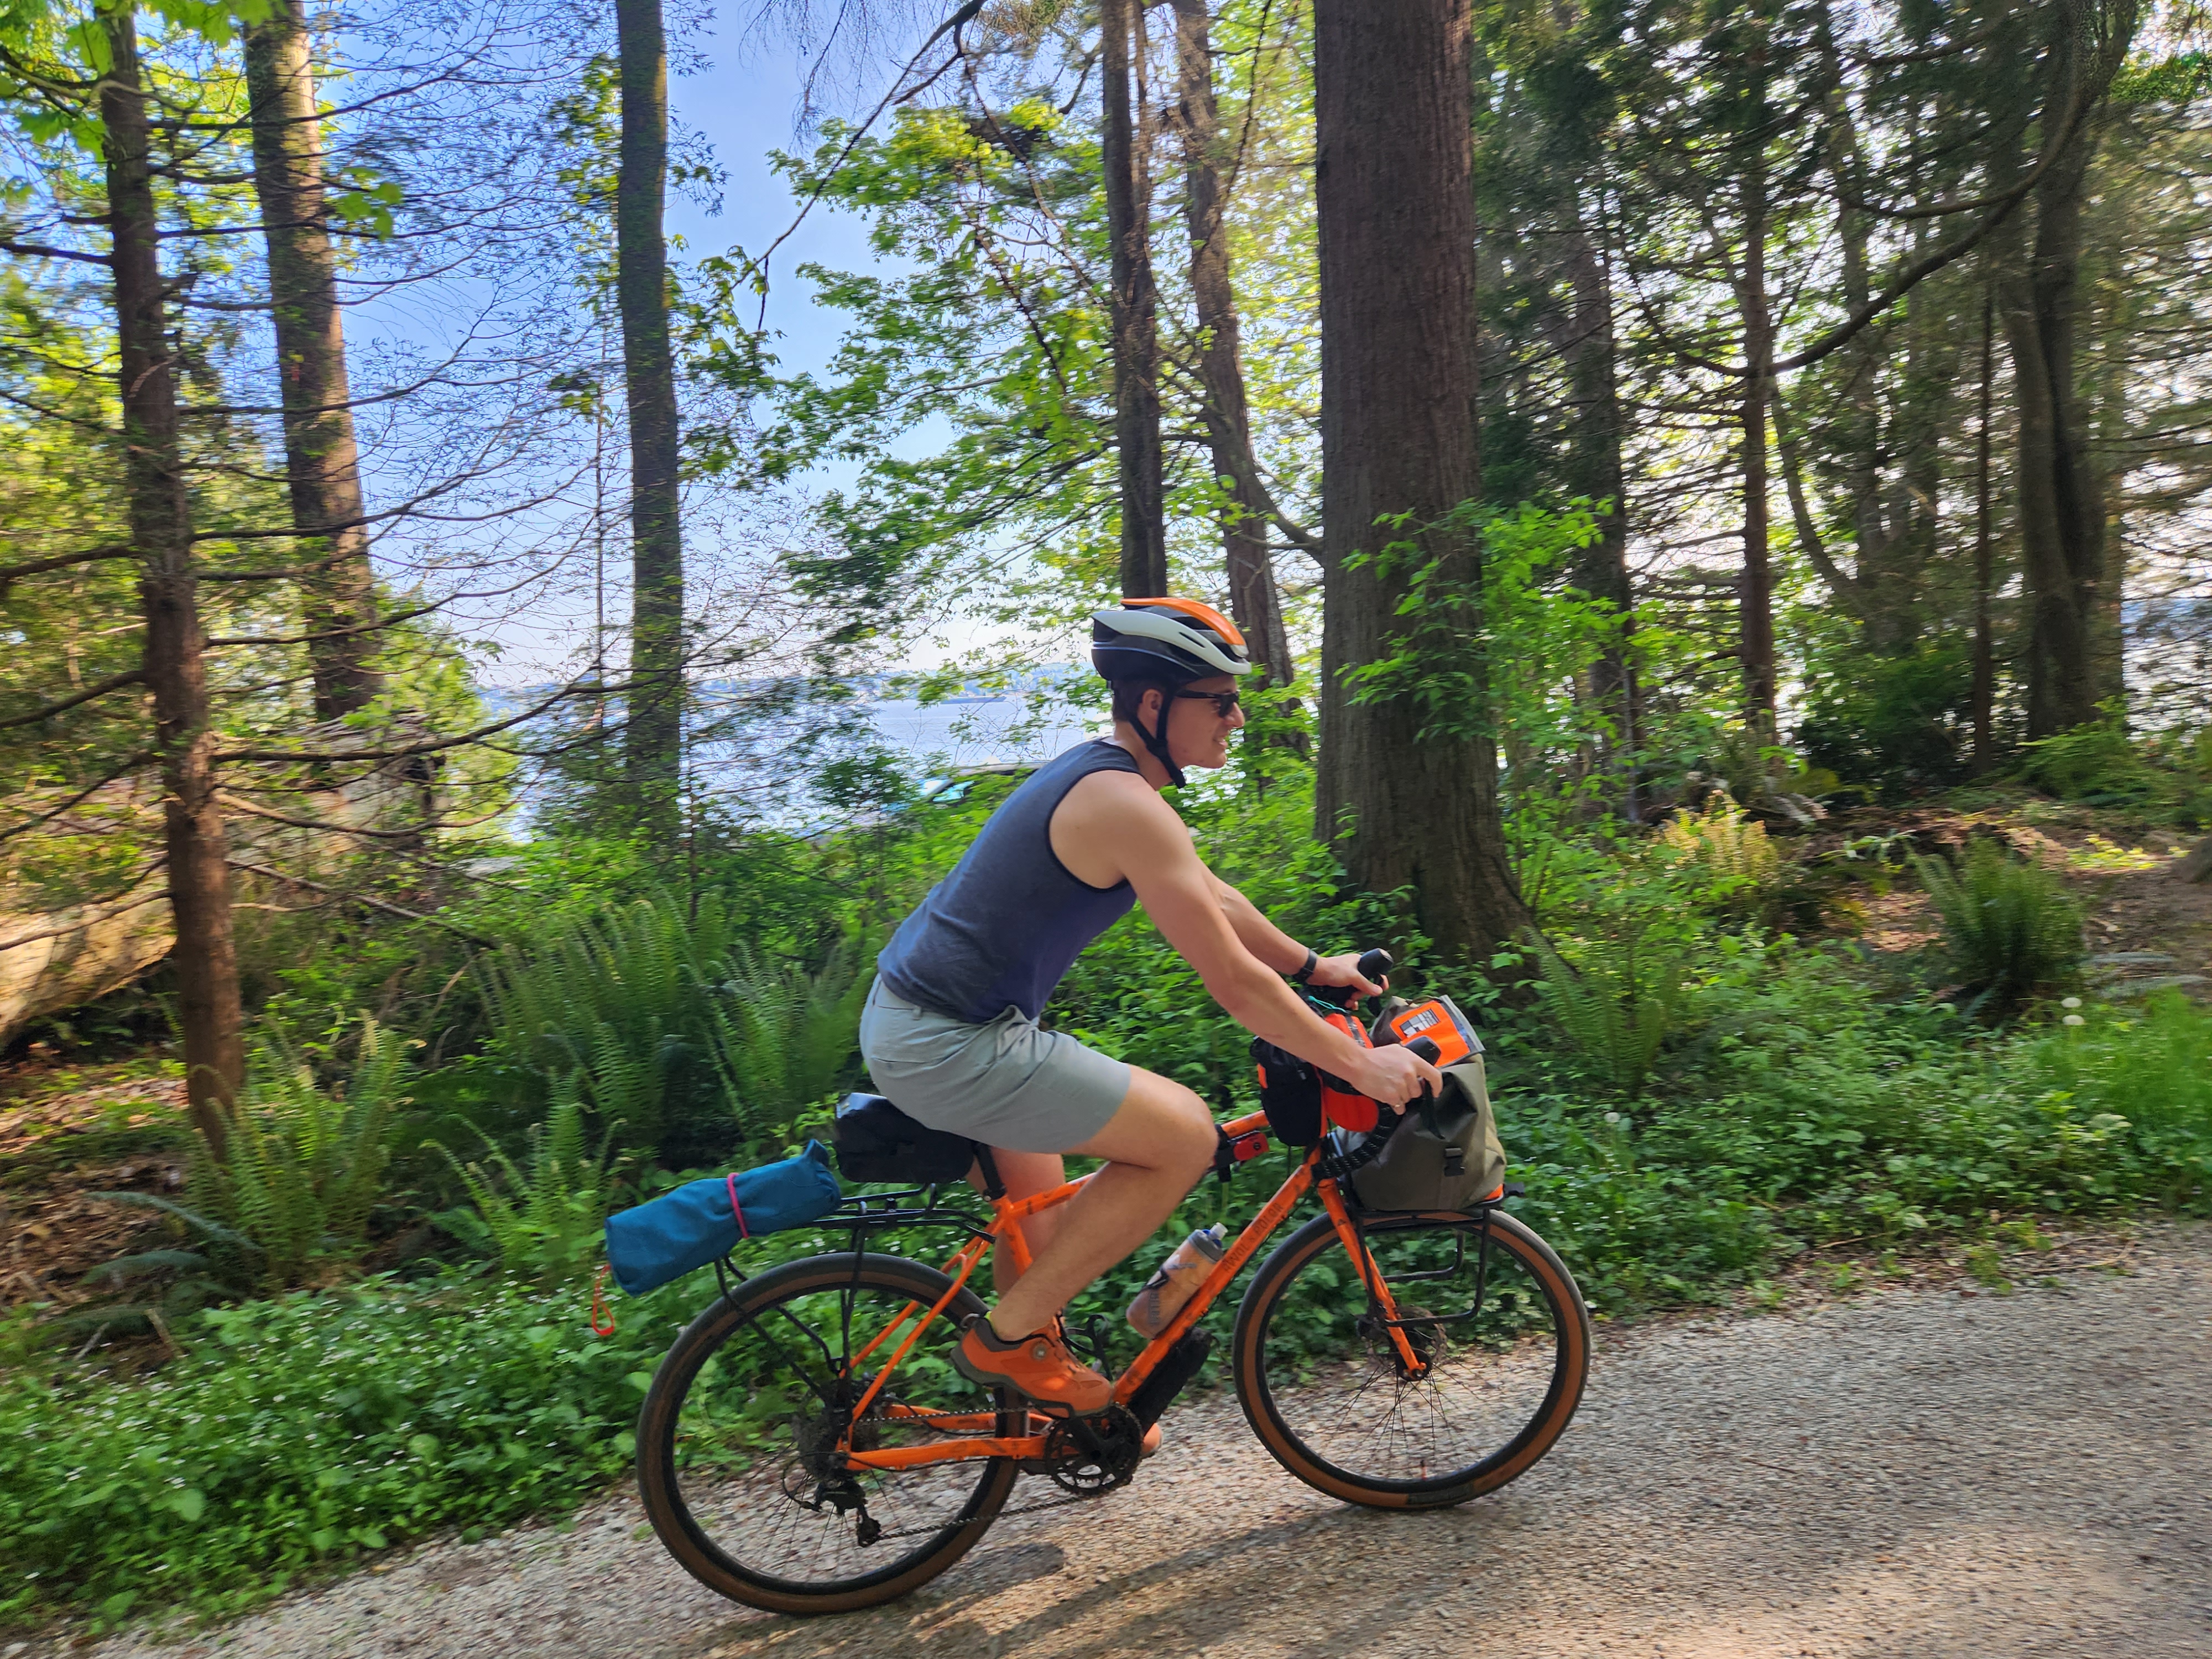 A man in his 30s rides his bike down a gravel trail. We see a peak-a-boo view of the ocean through the surrounding trees.